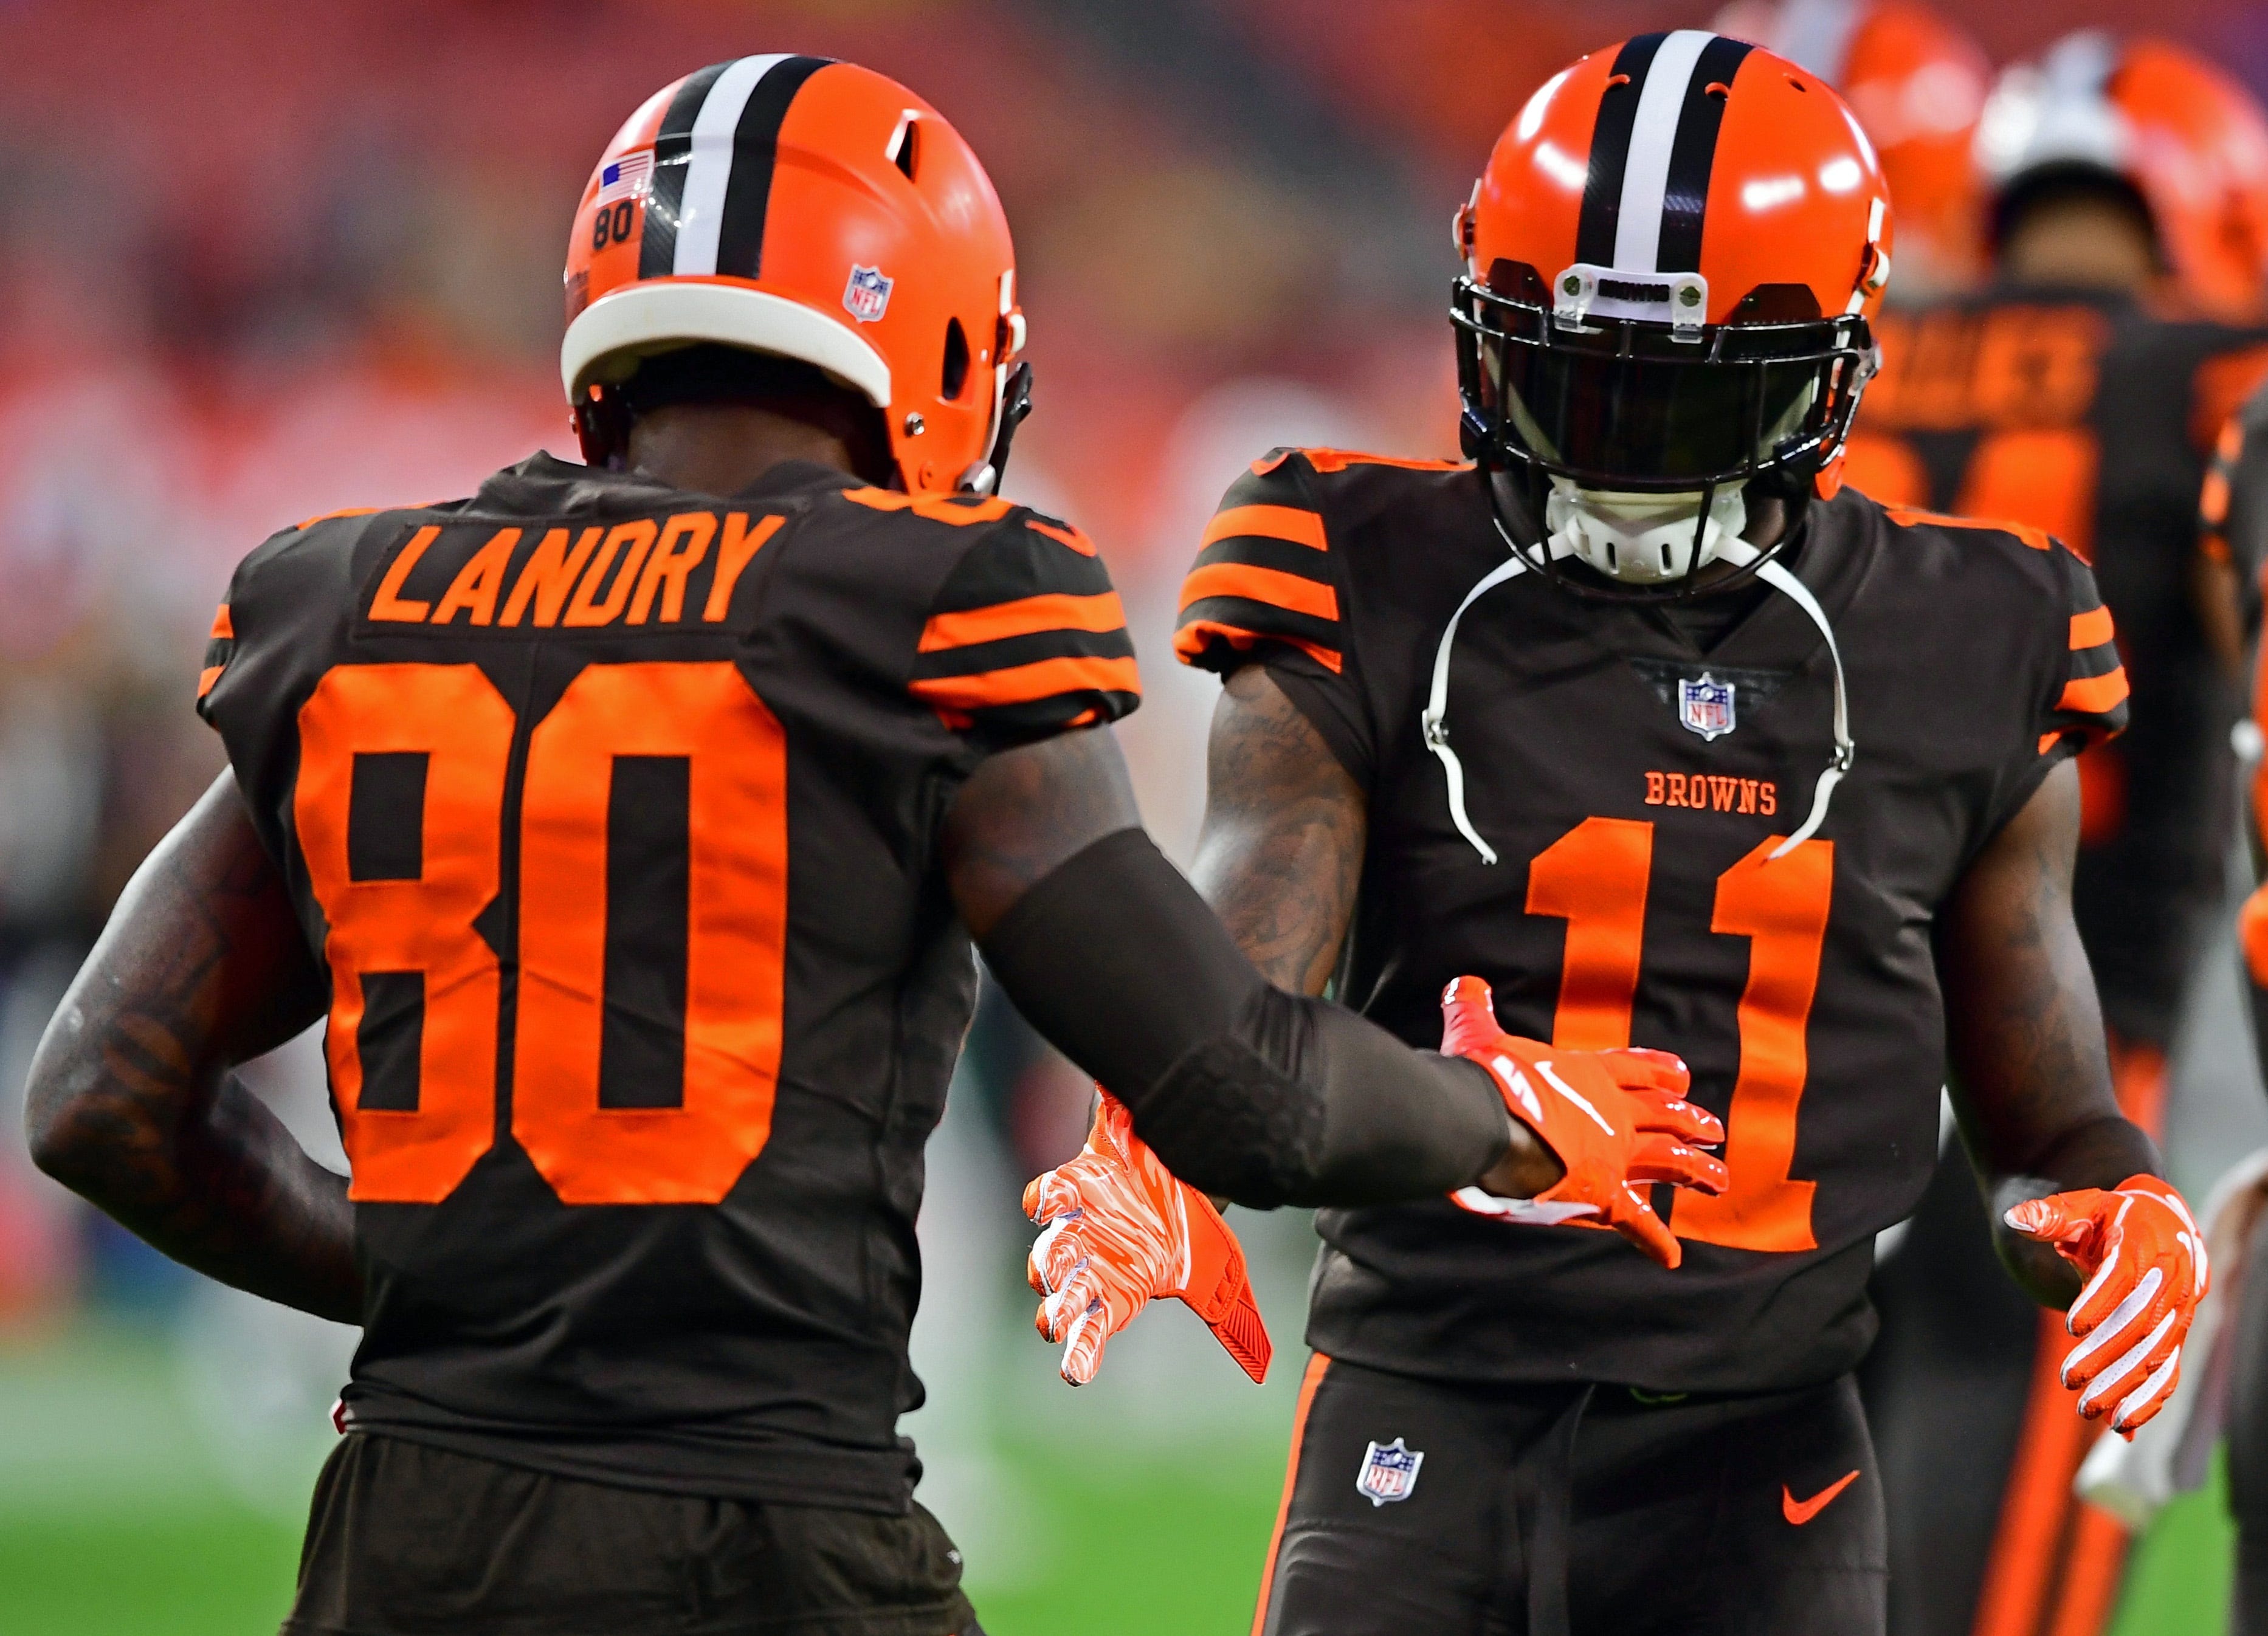 color rush browns jersey